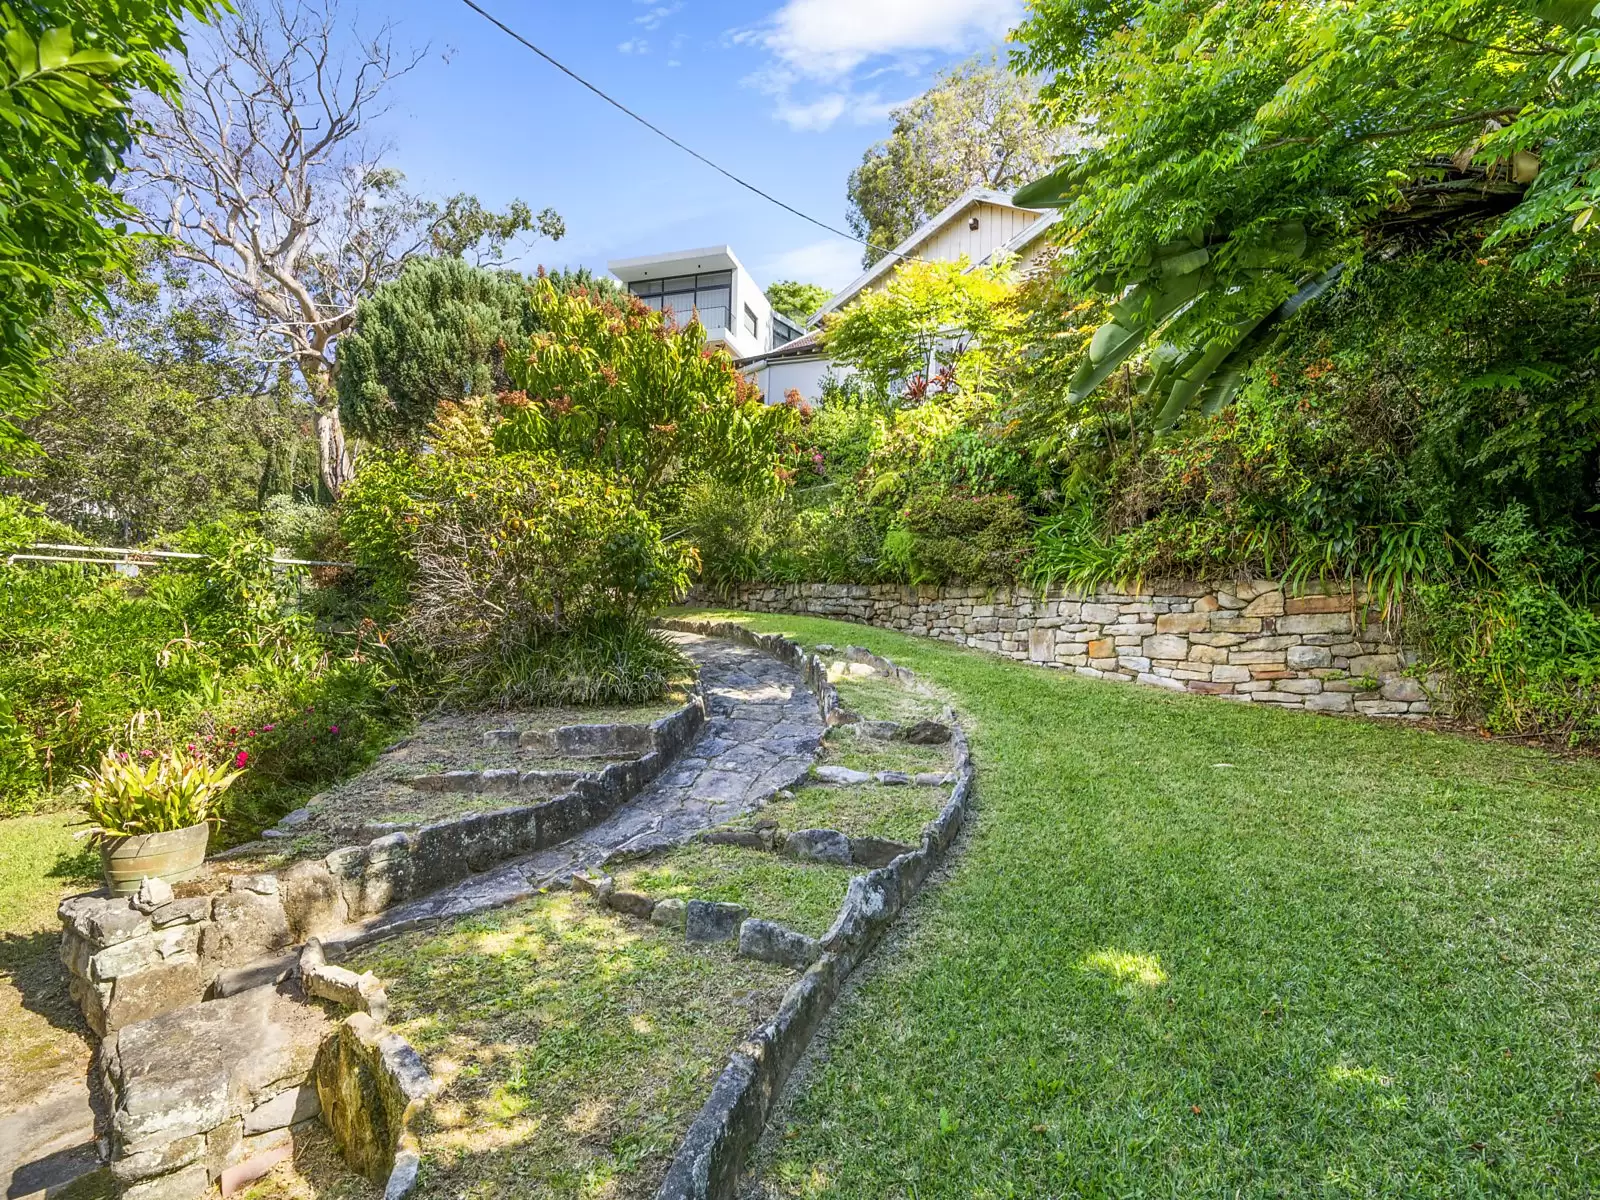 Photo #6: 23 Olola Avenue, Vaucluse - For Sale by Sydney Sotheby's International Realty